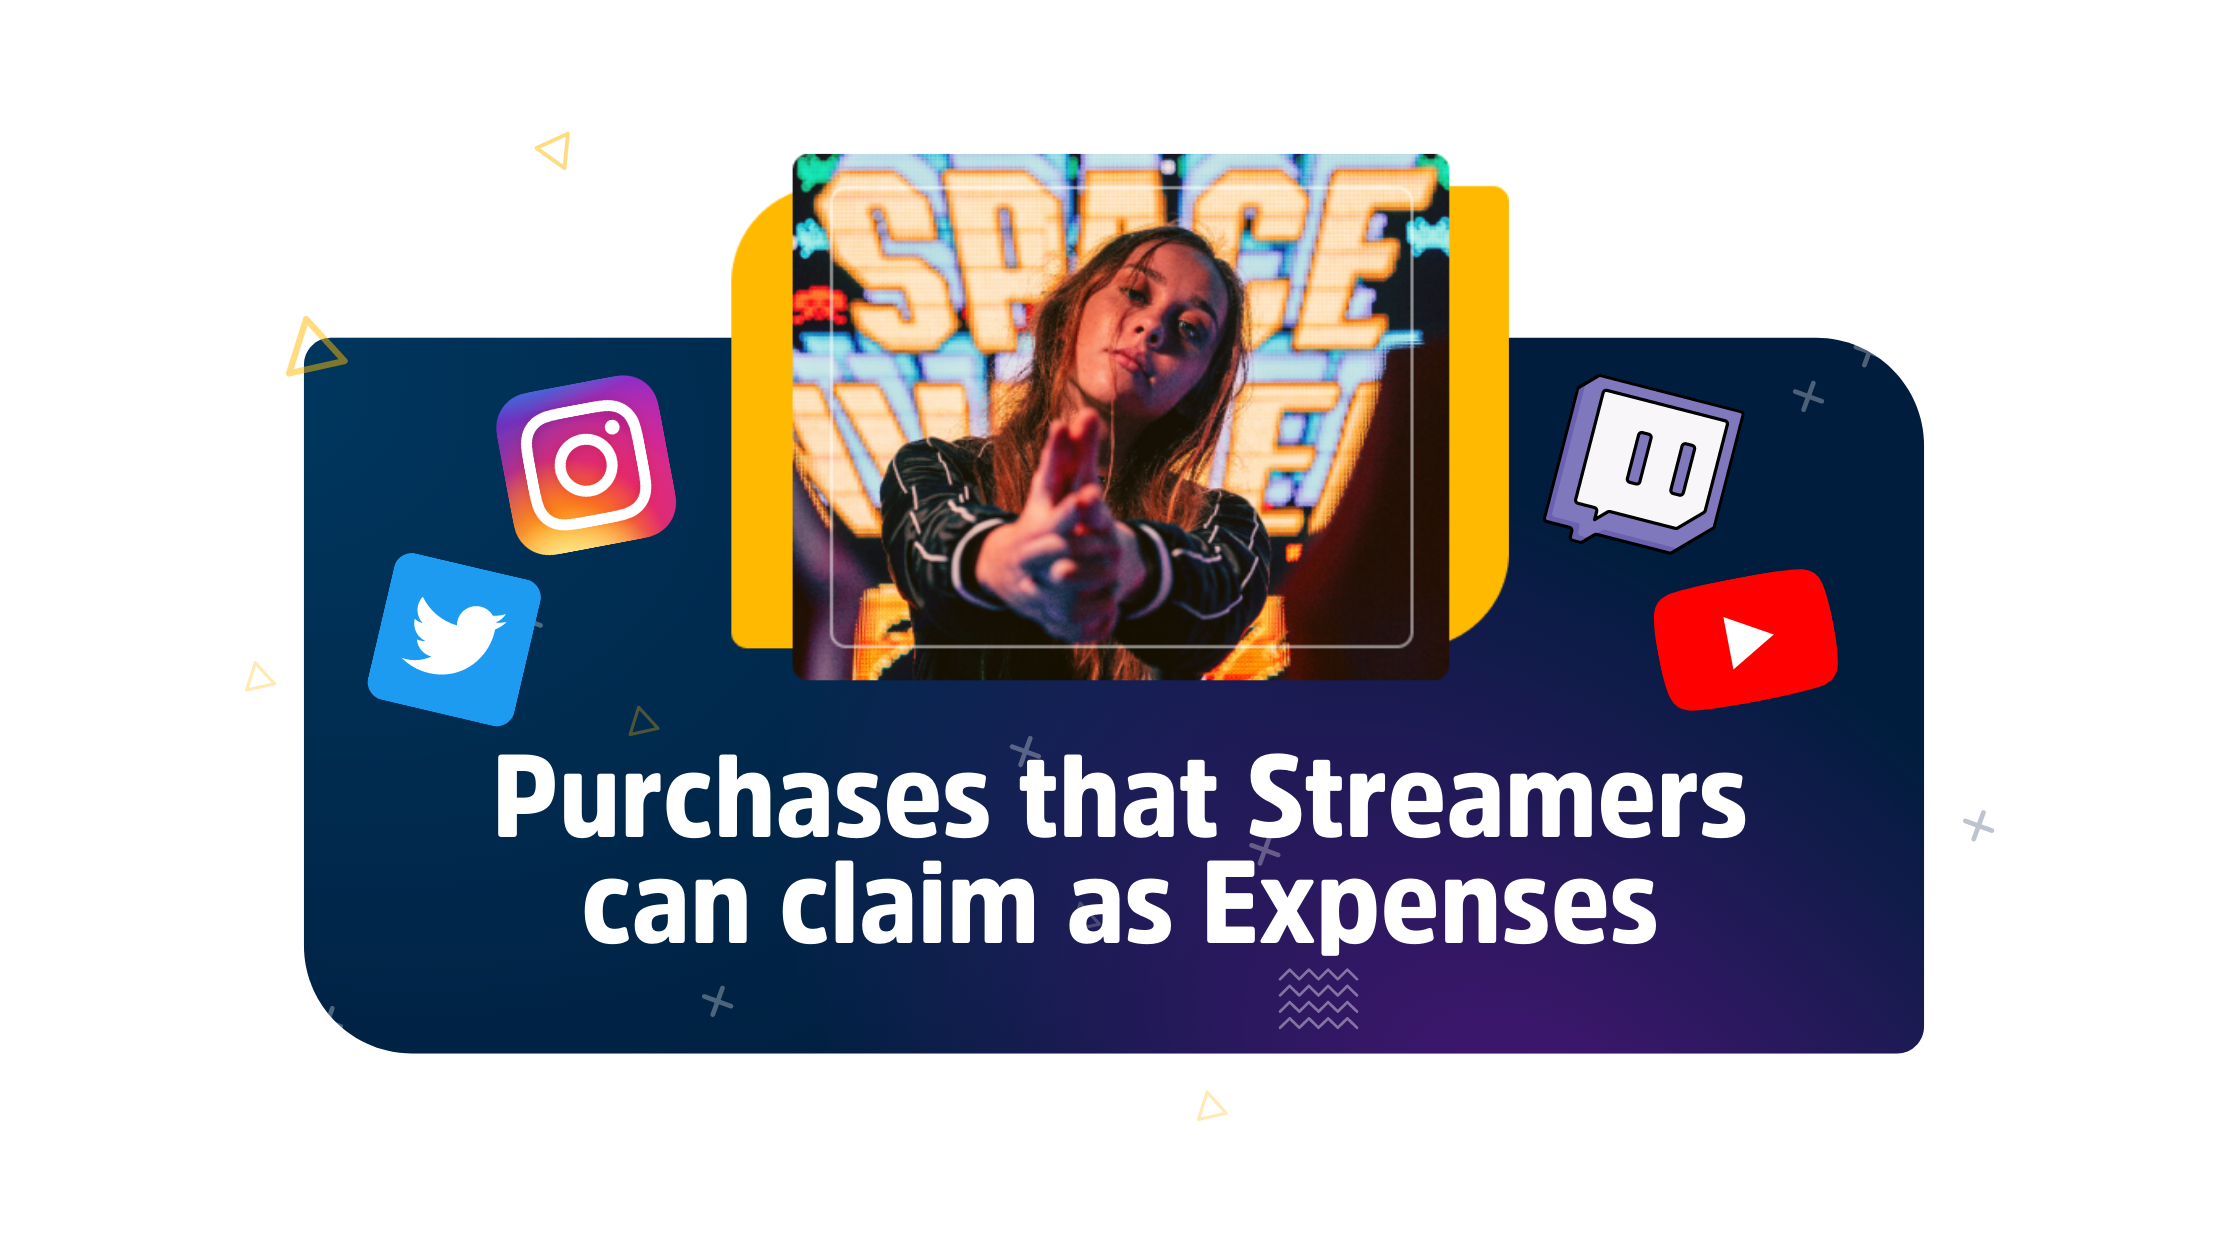 Purchases that Streamers can claim as Expenses